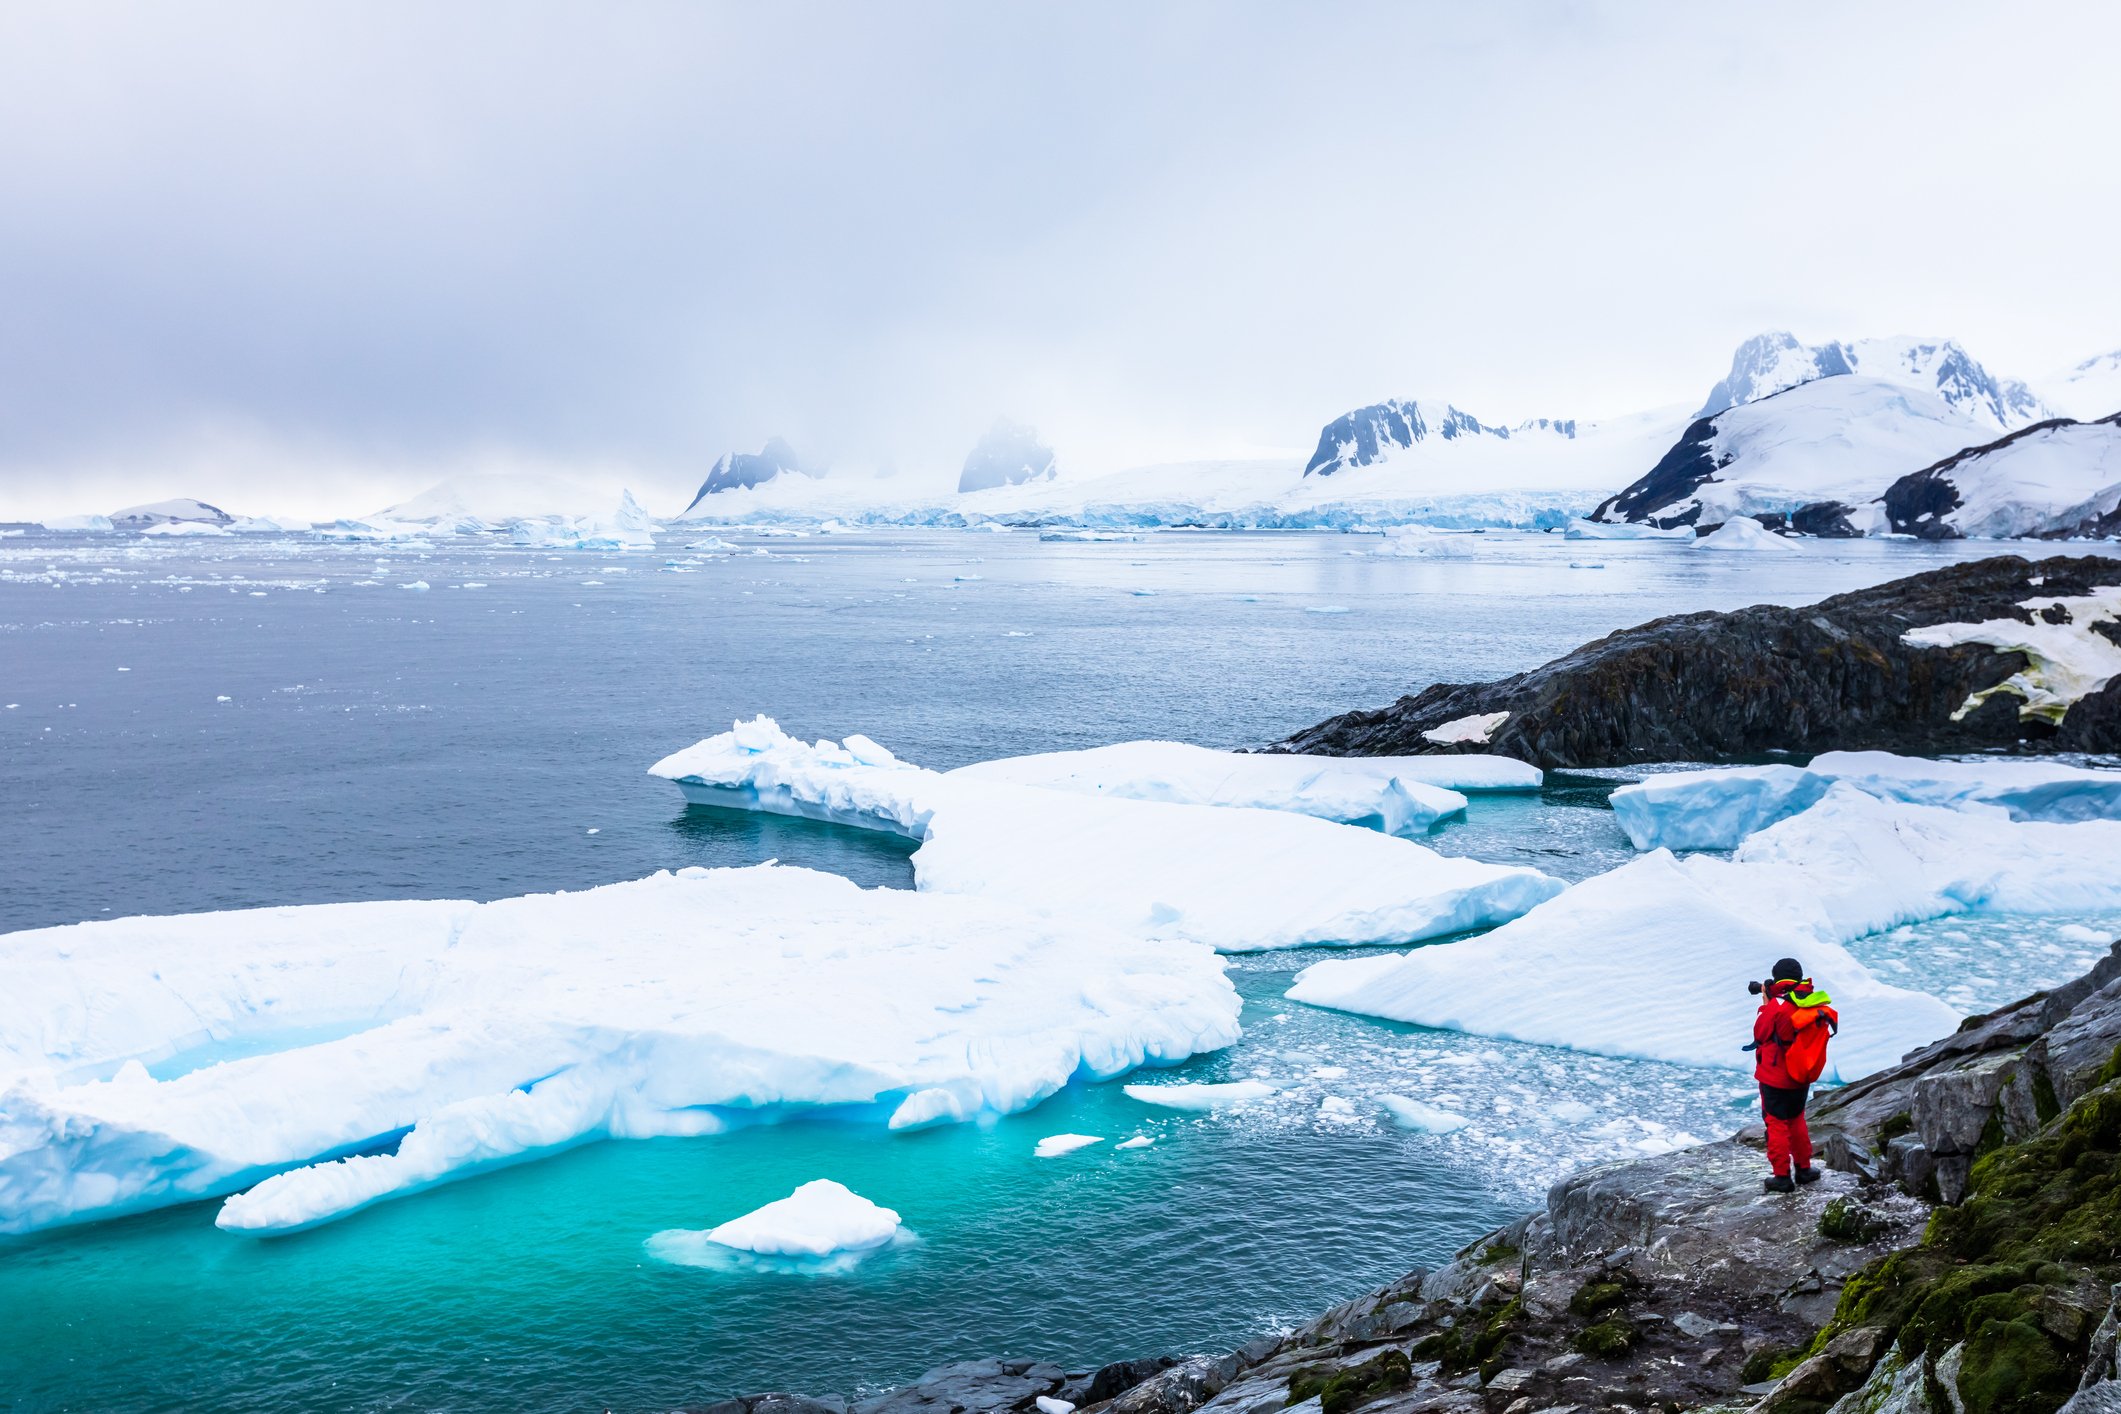 Antarctica with icebergs, snow, mountains and glaciers, beautiful nature in Antarctic Peninsula with ice science